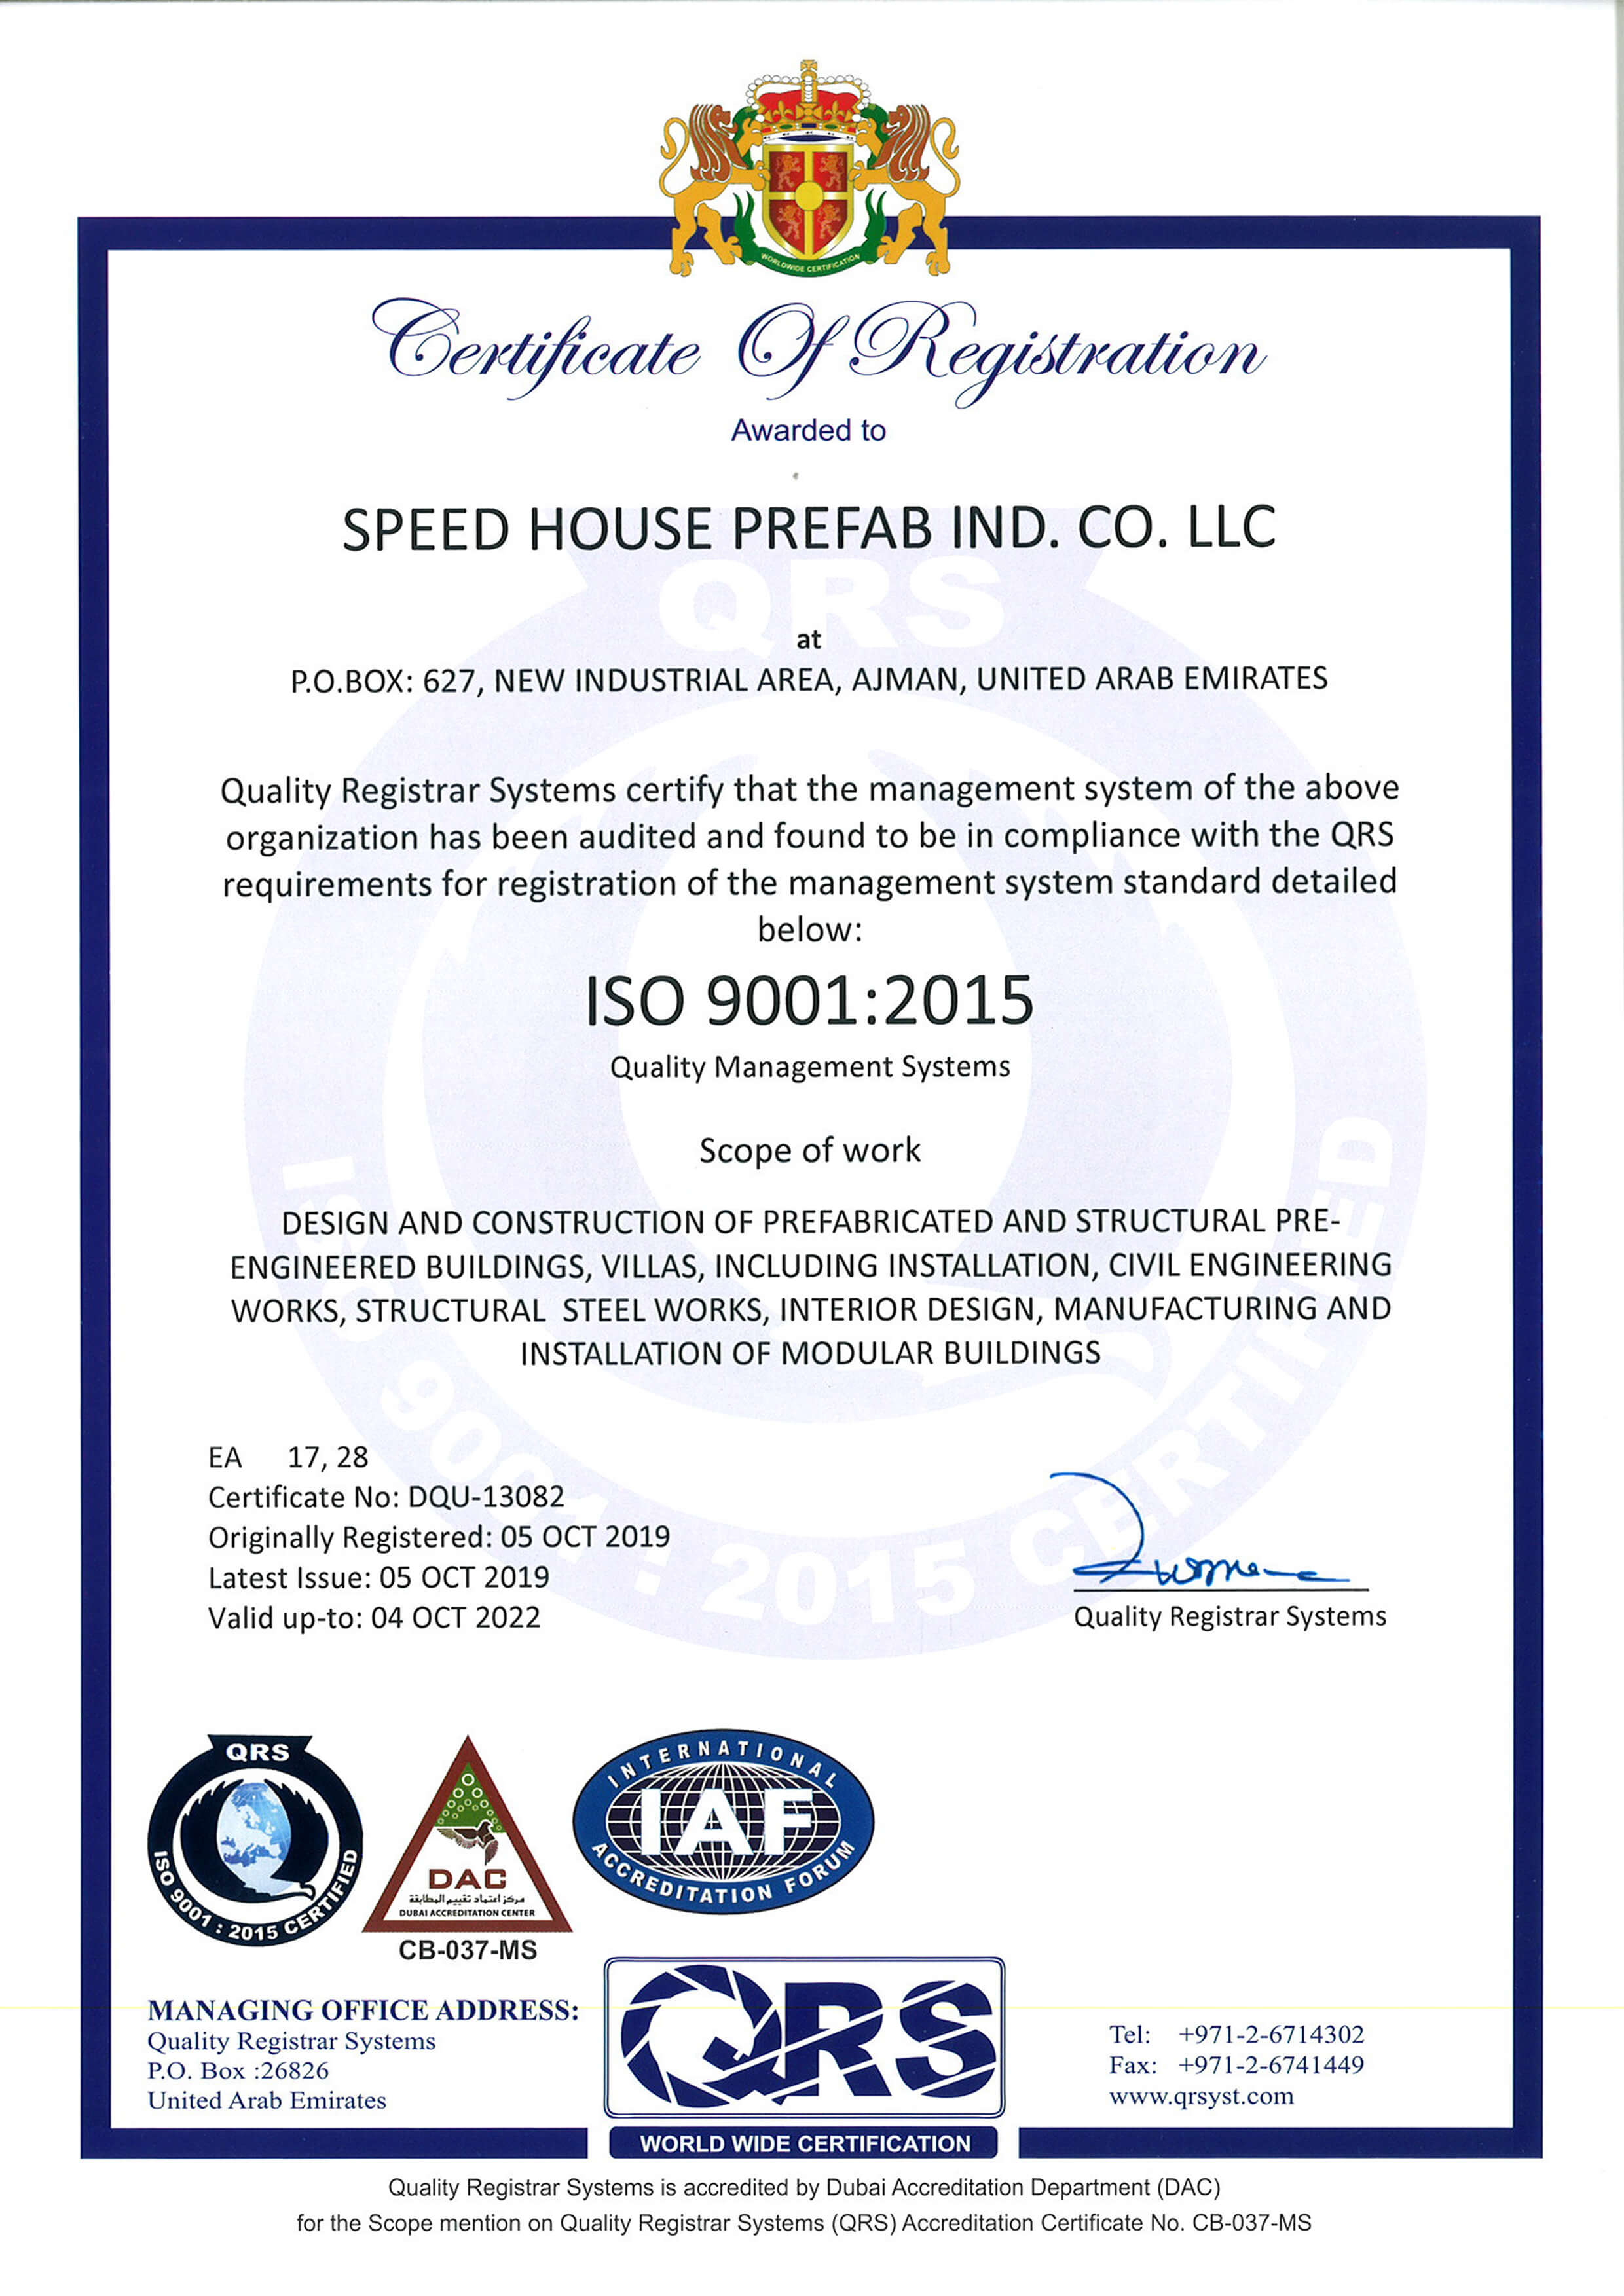 Speed House Group Prefab ISO 9001 Certificate